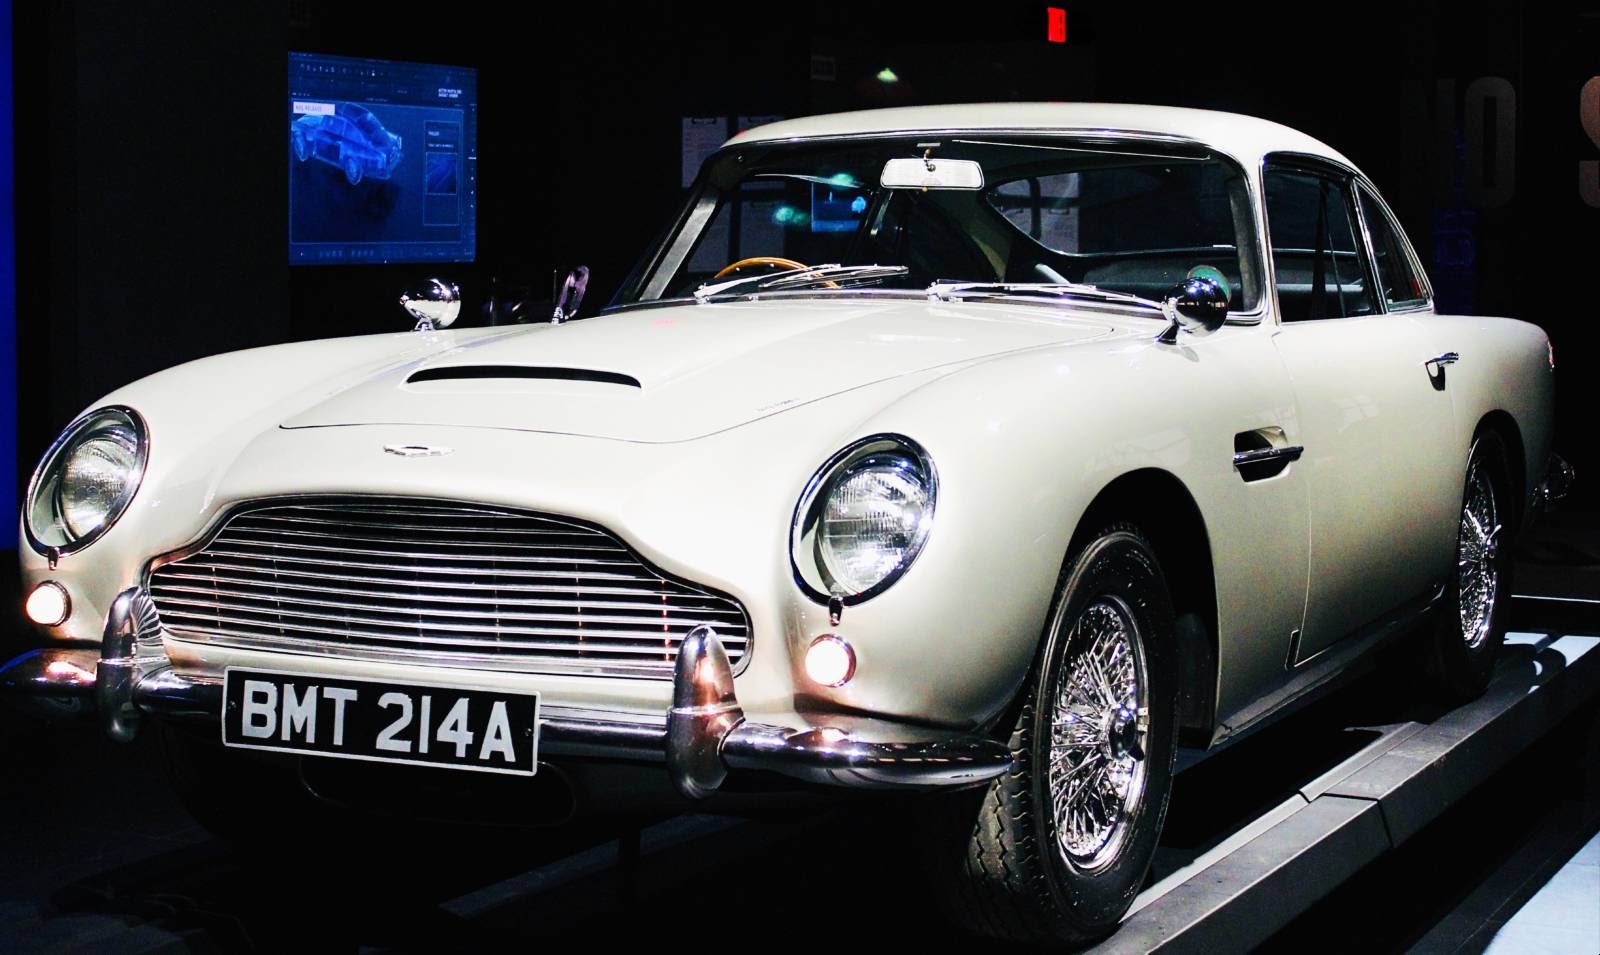 James Bond's DB5 at SPYSCAPE HQ in New York City